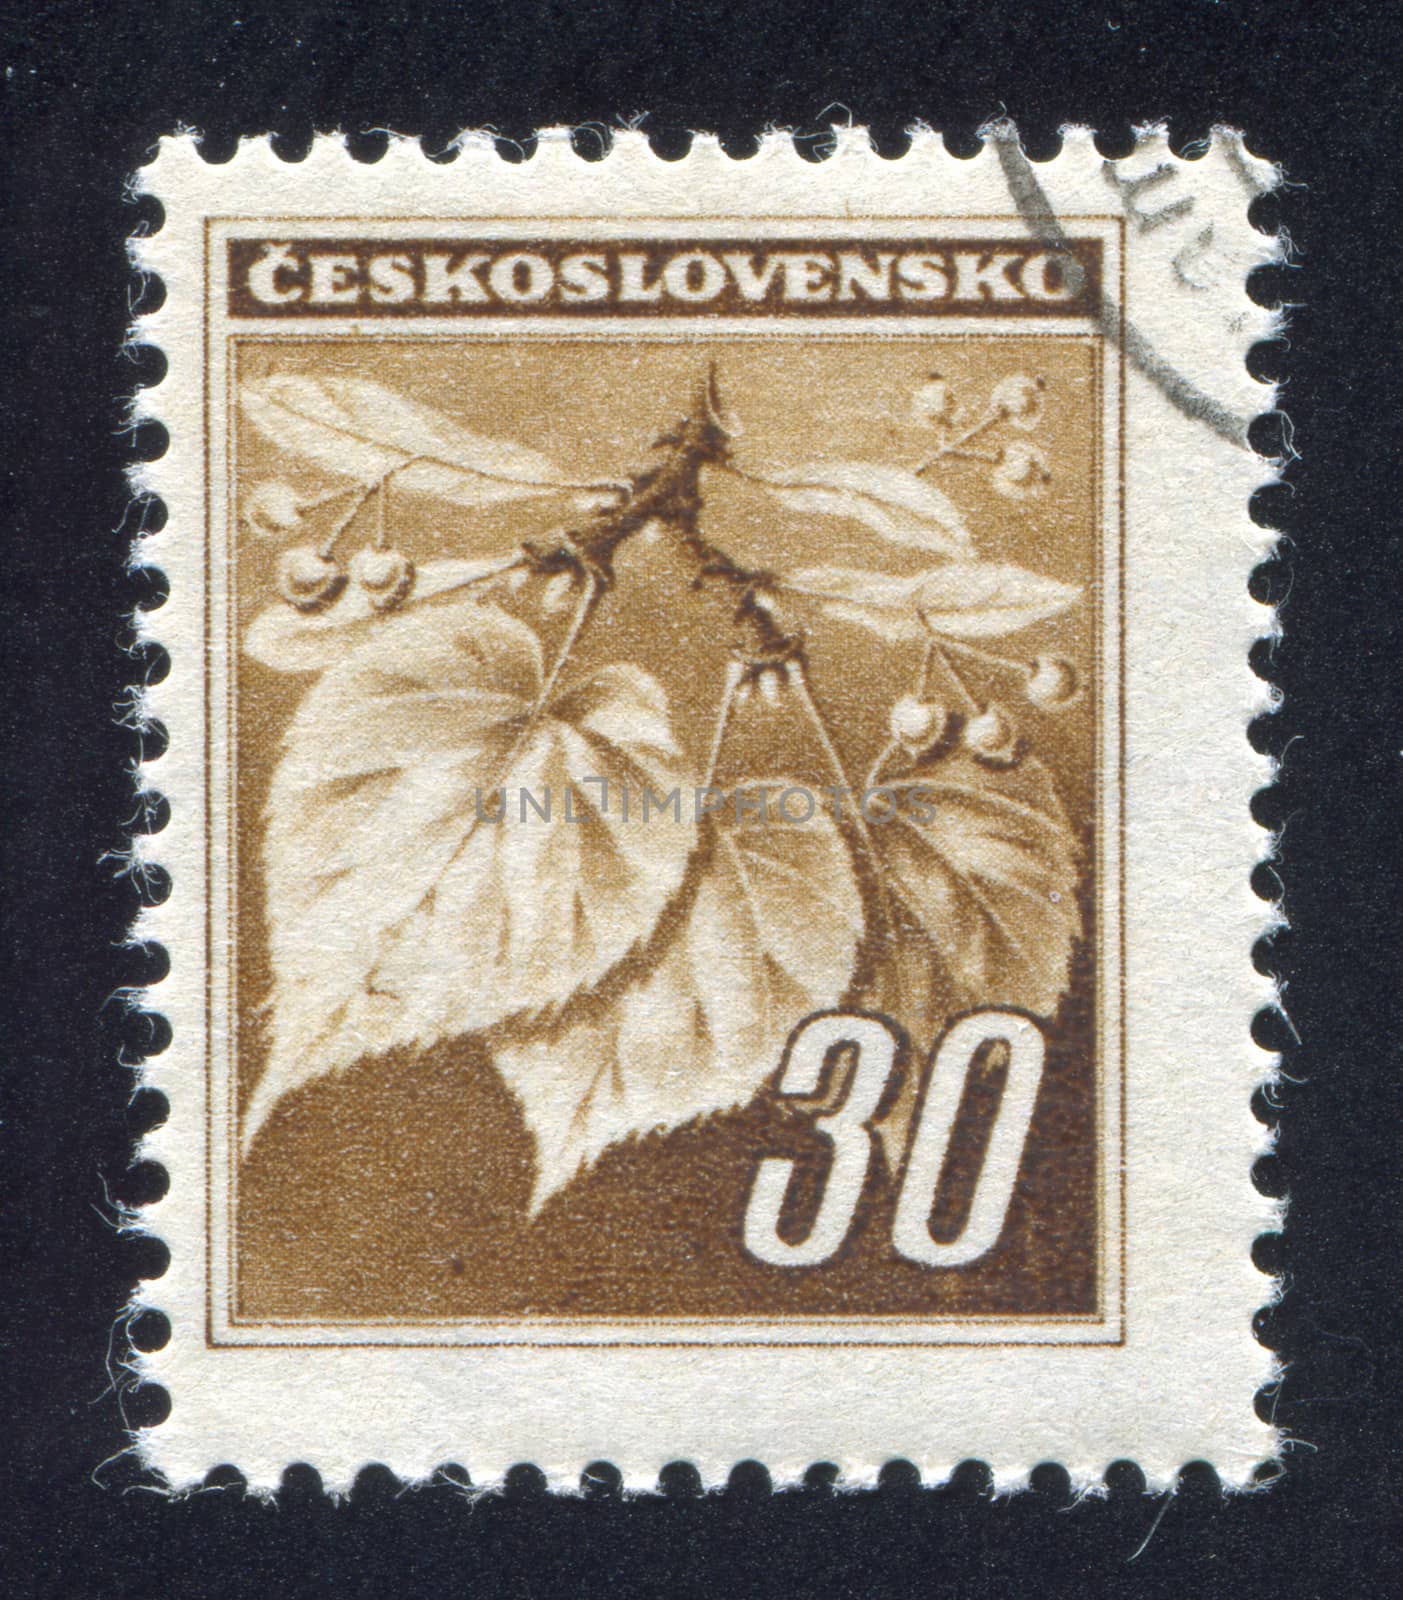 CZECHOSLOVAKIA - CIRCA 1939: stamp printed by Czechoslovakia, shows Linden Leaves and Buds, circa 1939